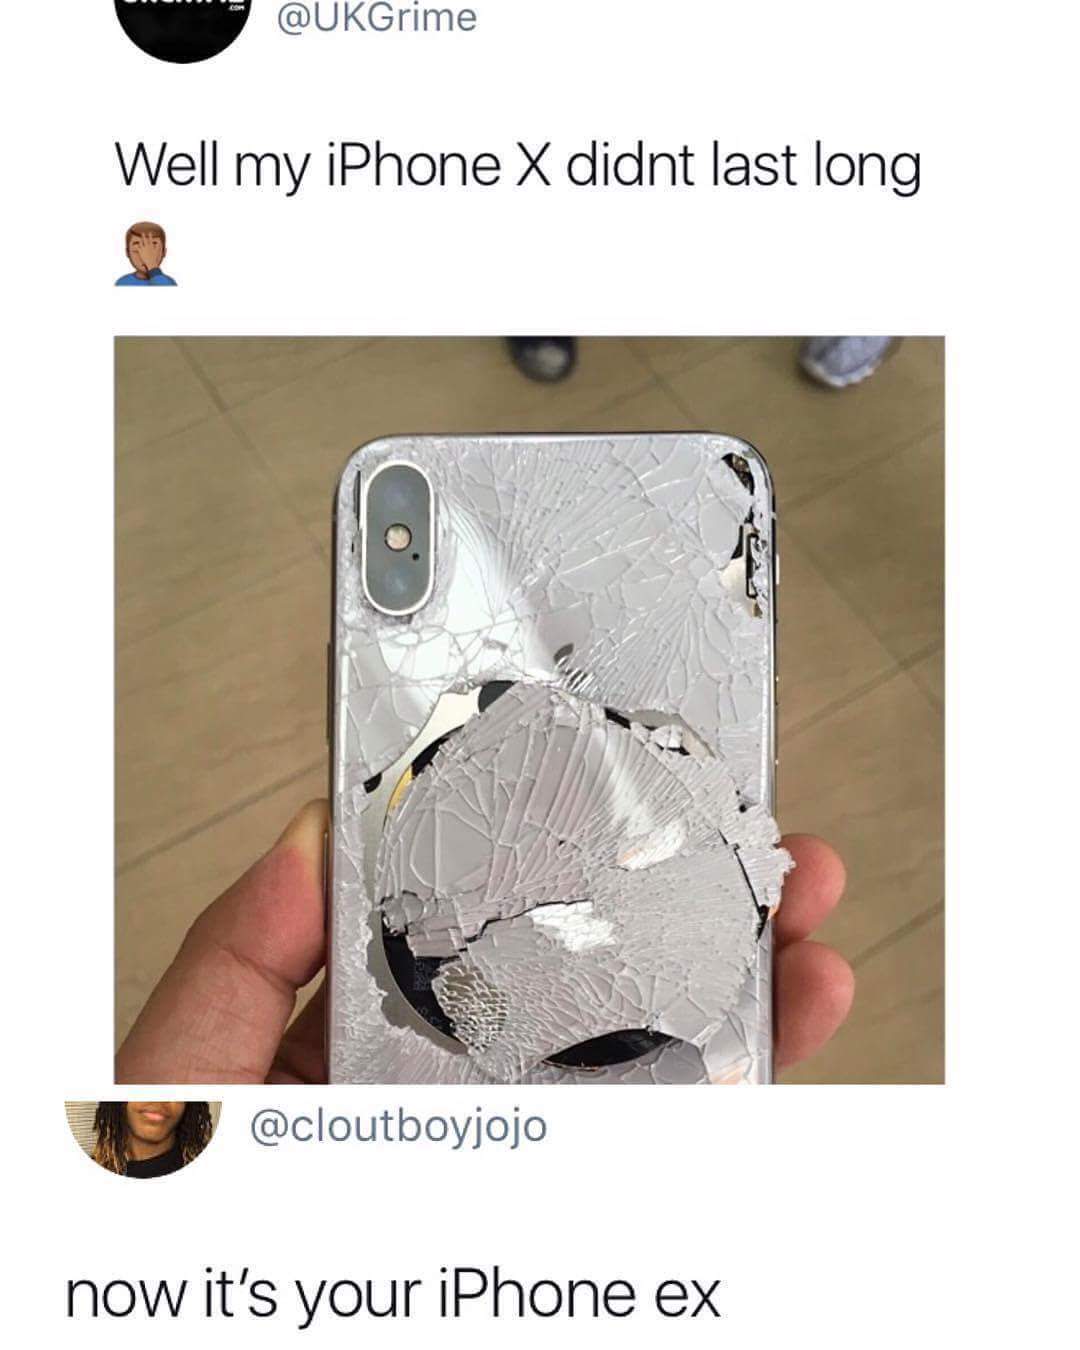 tweet - iphone x shatter - Well my iPhone X didnt last long now it's your iPhone ex